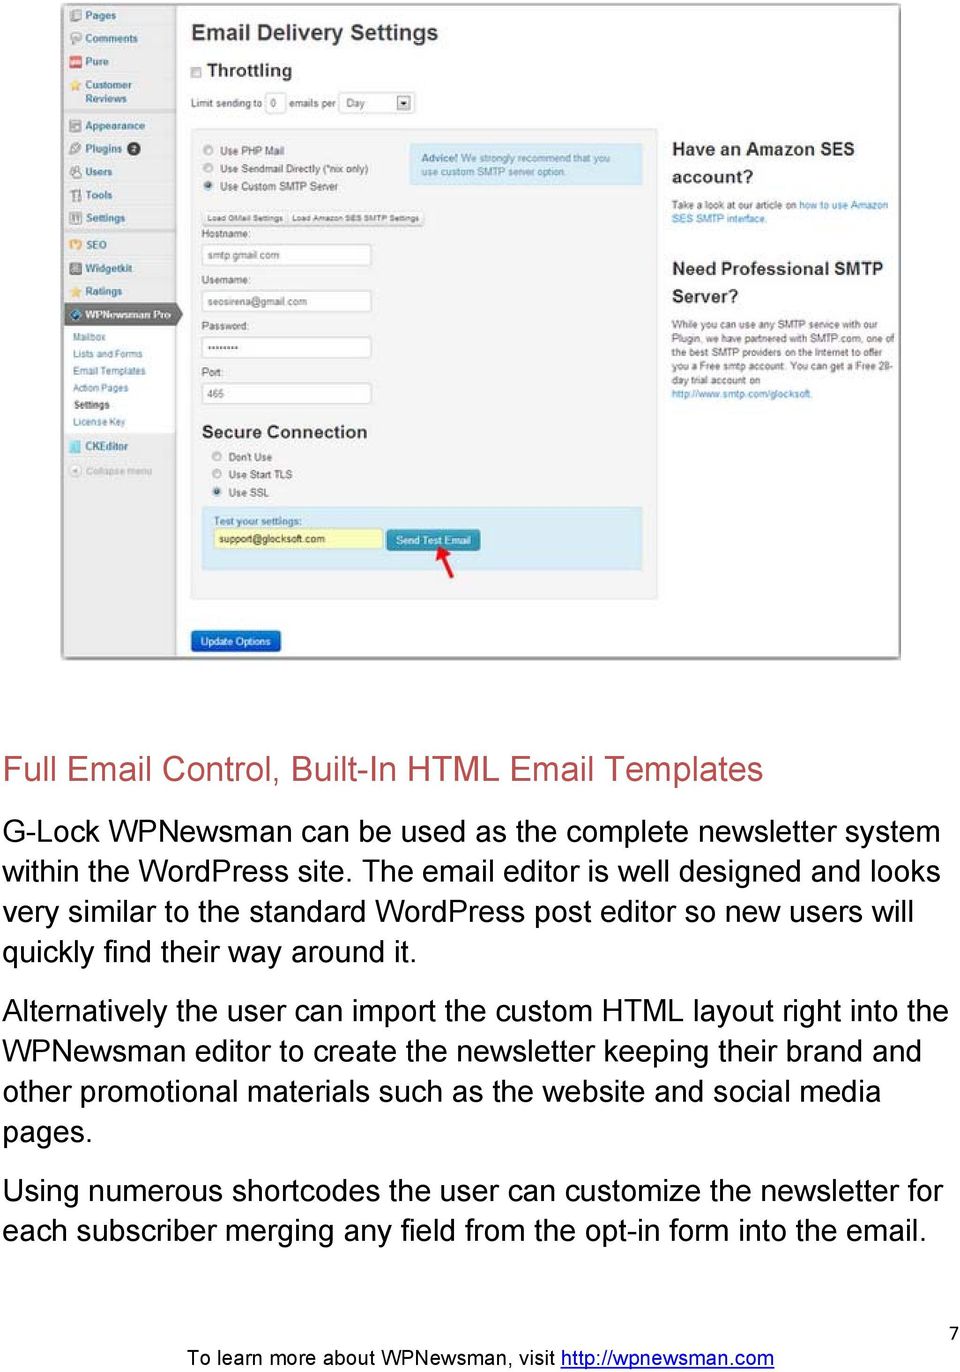 Alternatively the user can import the custom HTML layout right into the WPNewsman editor to create the newsletter keeping their brand and other promotional